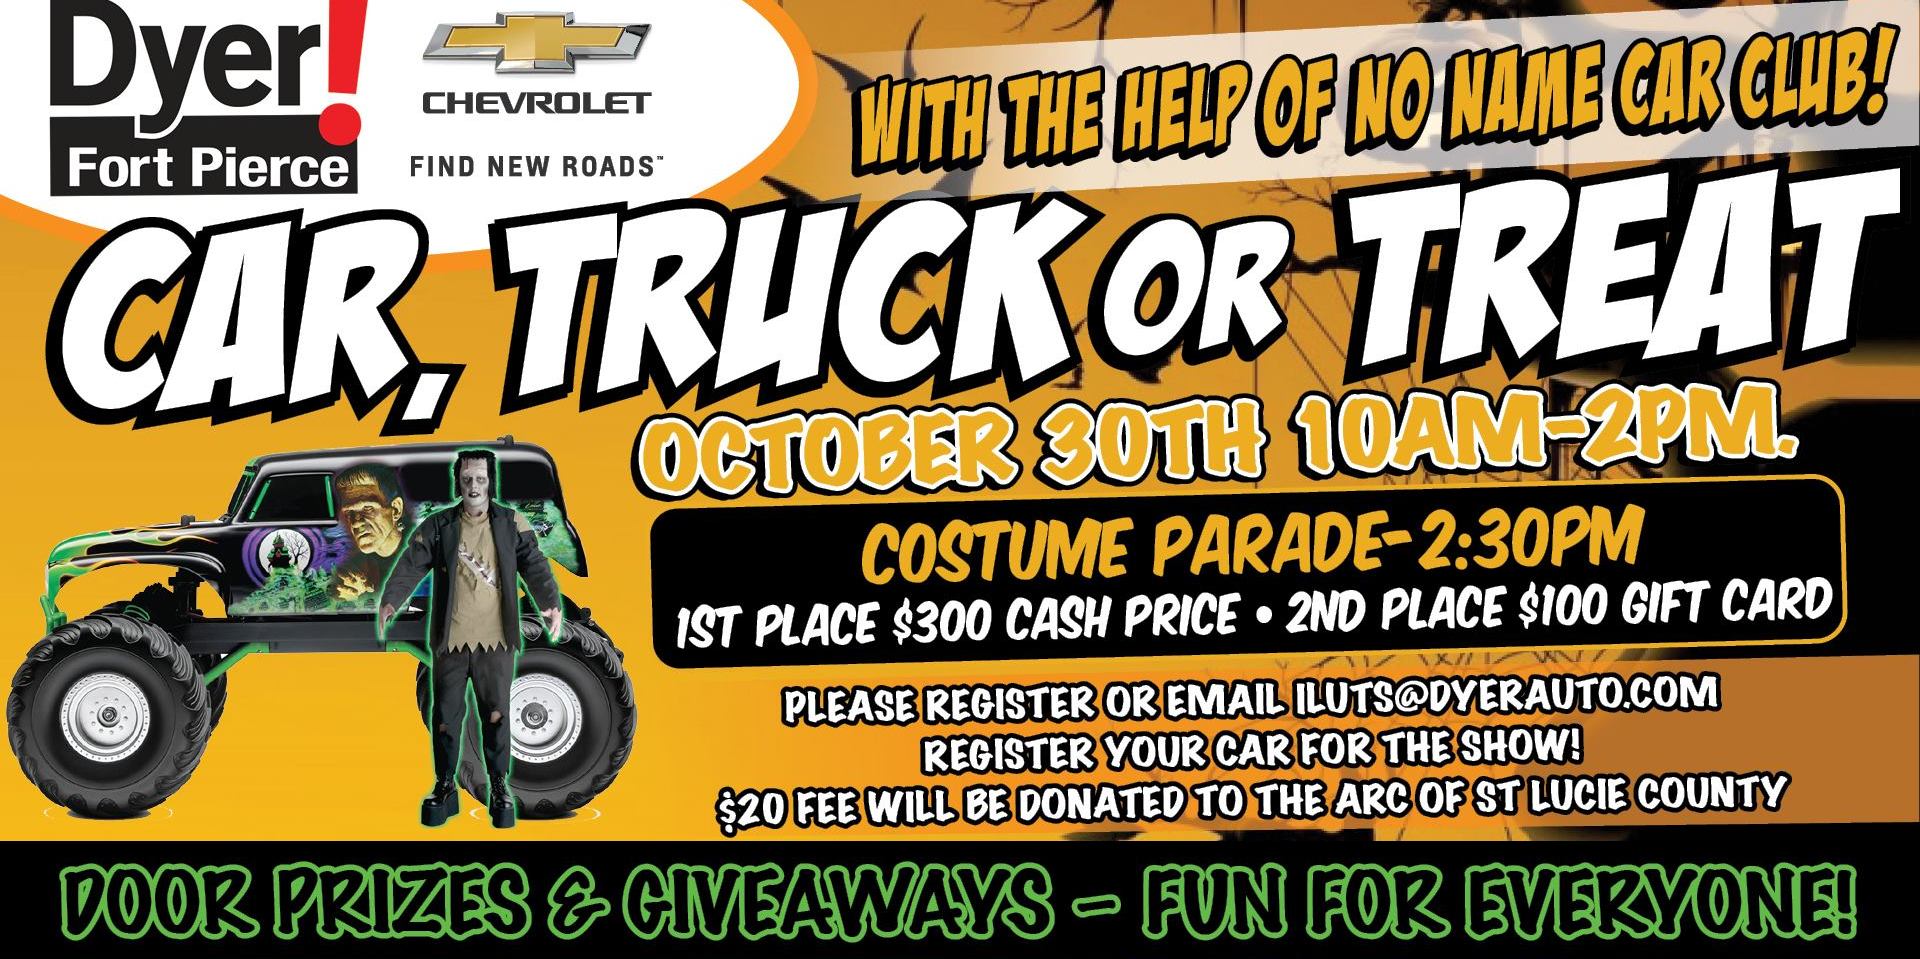 CAR show, TRUCK or TREAT promotional image